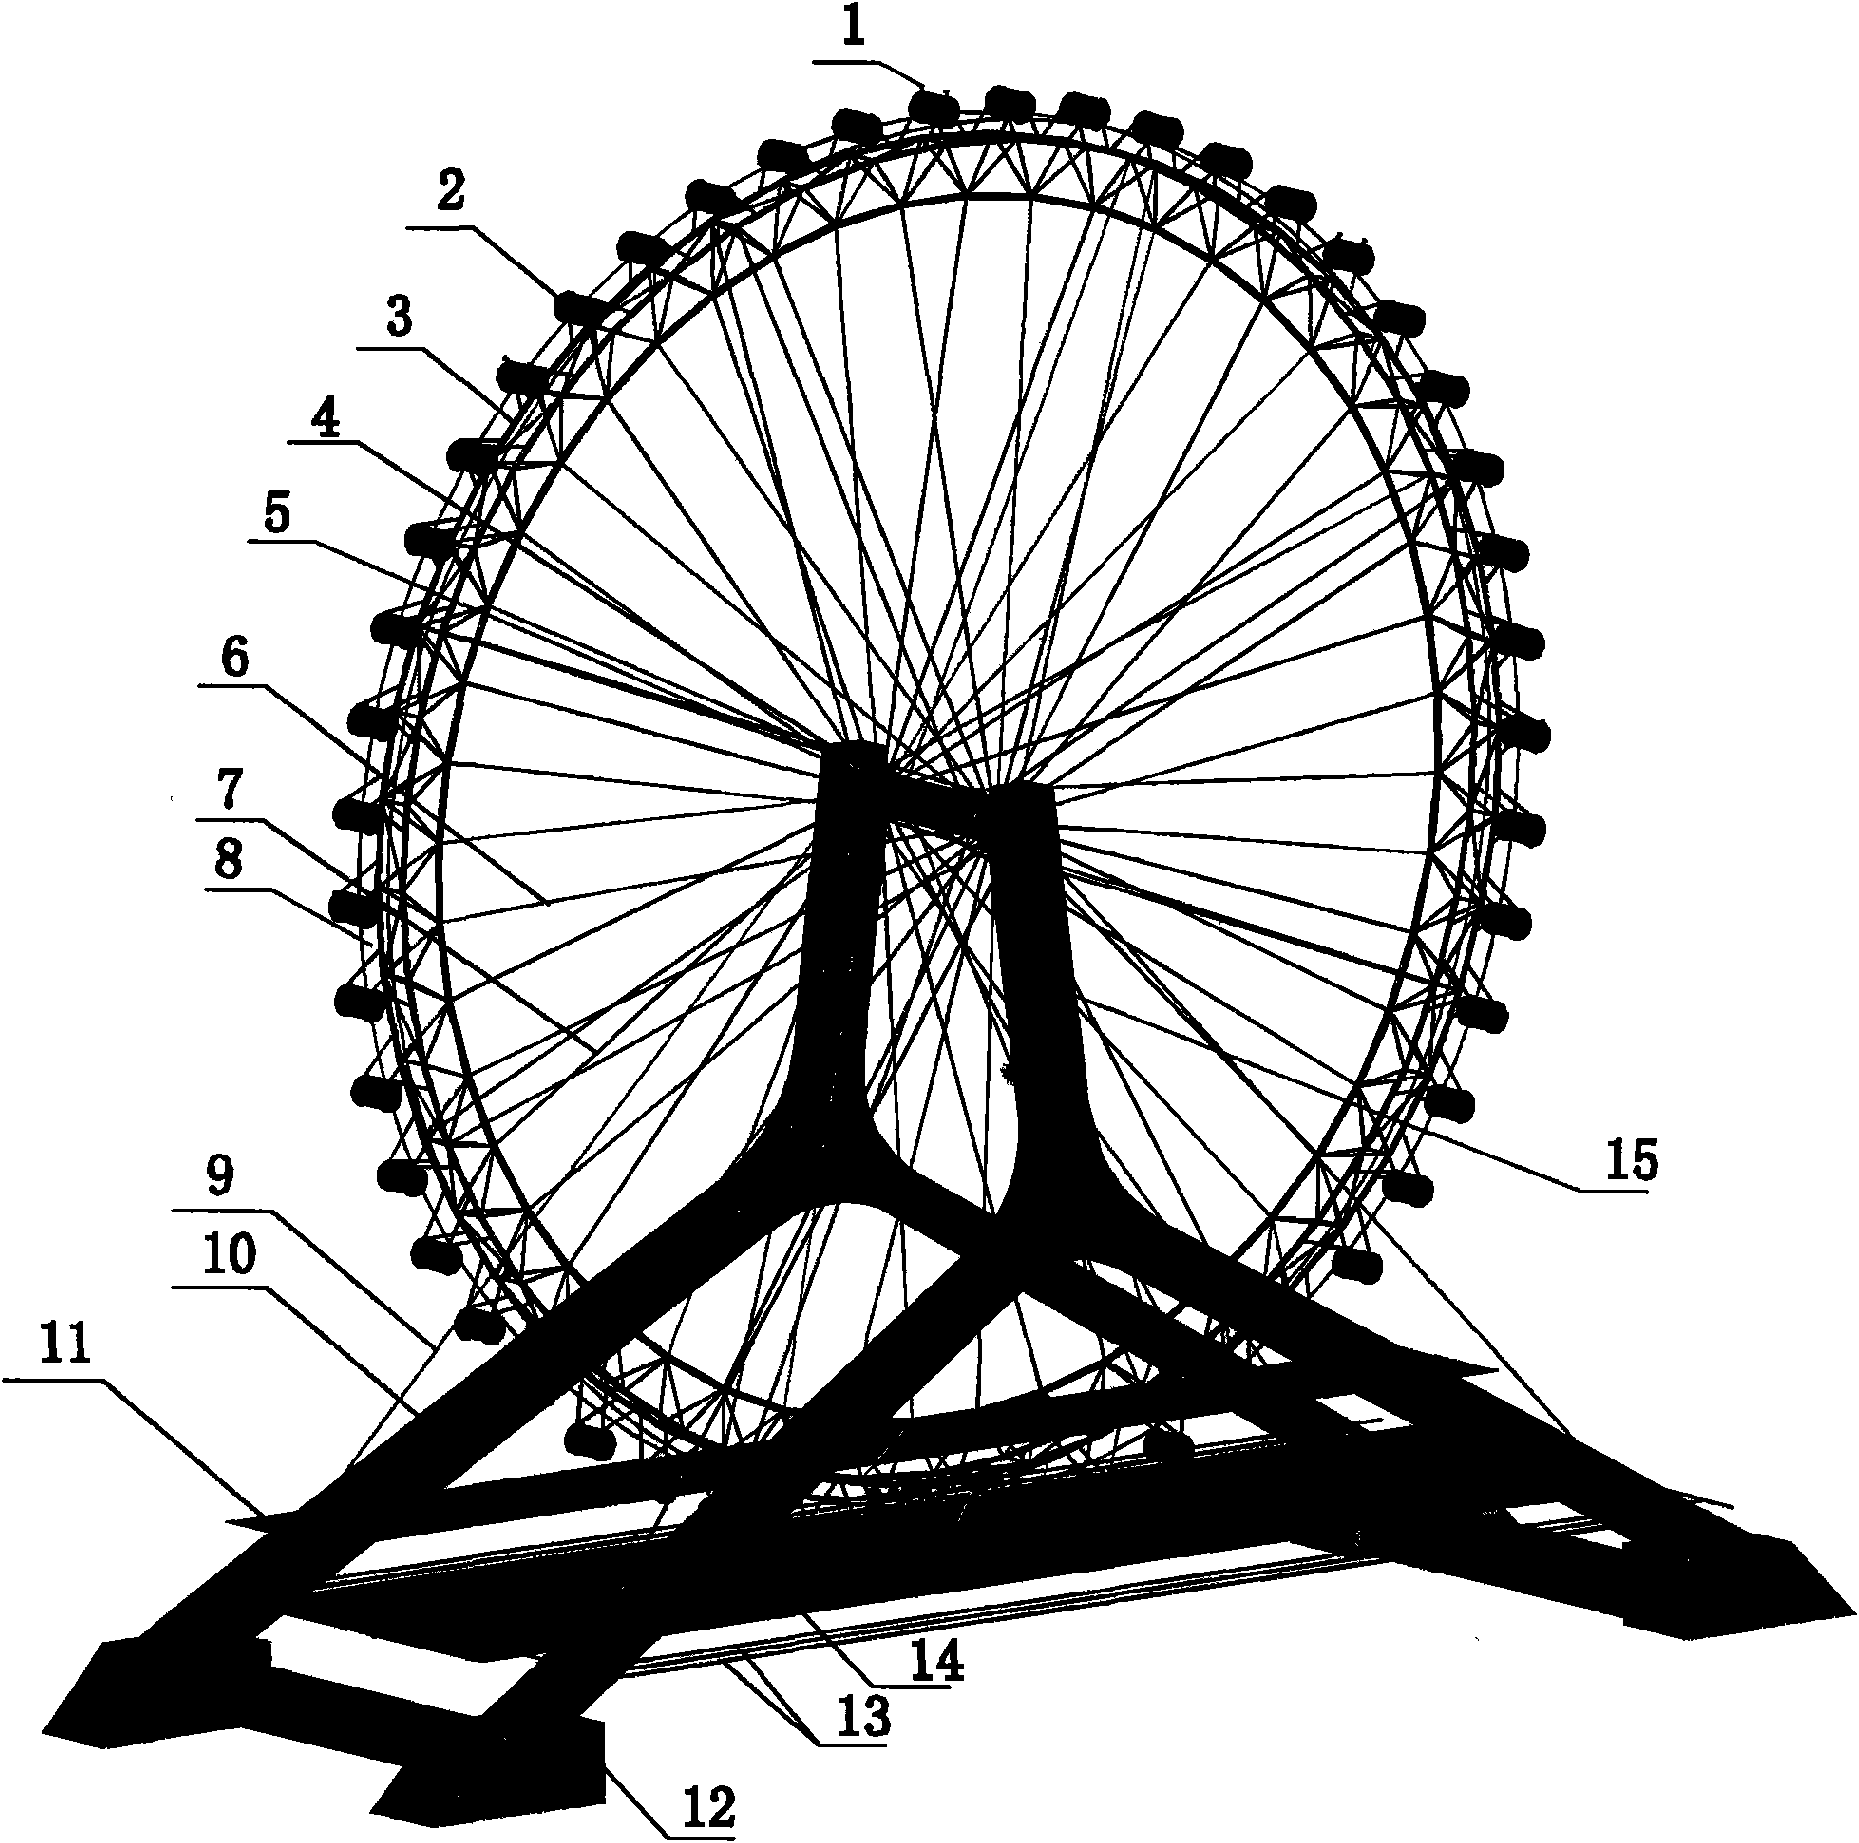 Towed rotary vertical section-to-section assembling construction system for large-sized spoke type ferris wheel disc